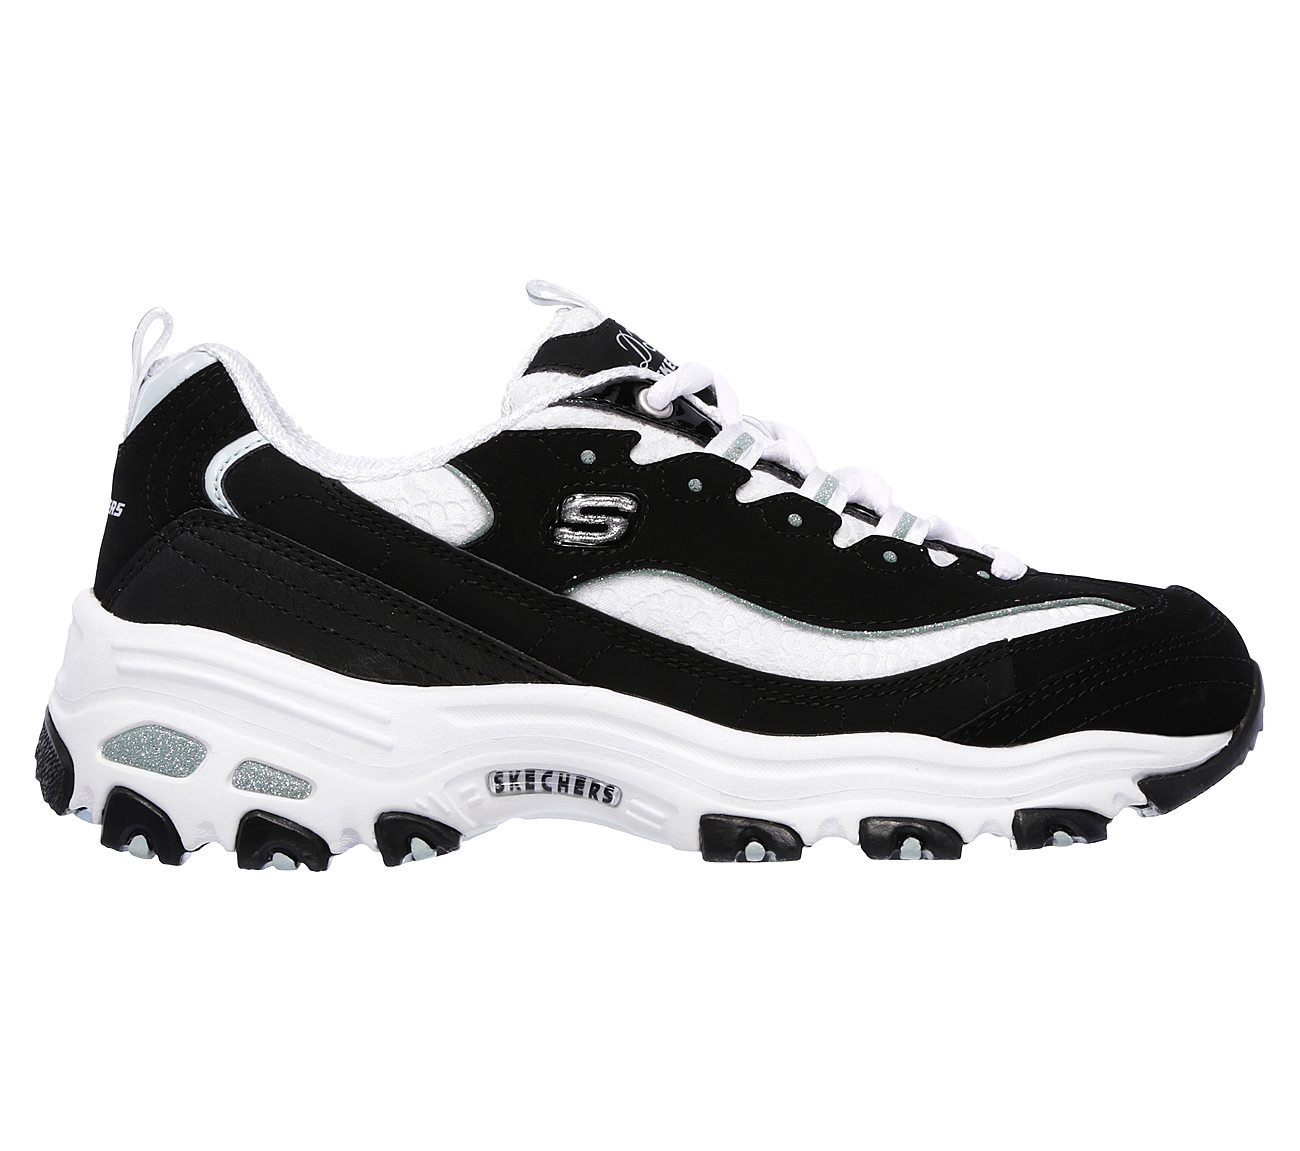 looking for skechers shoes